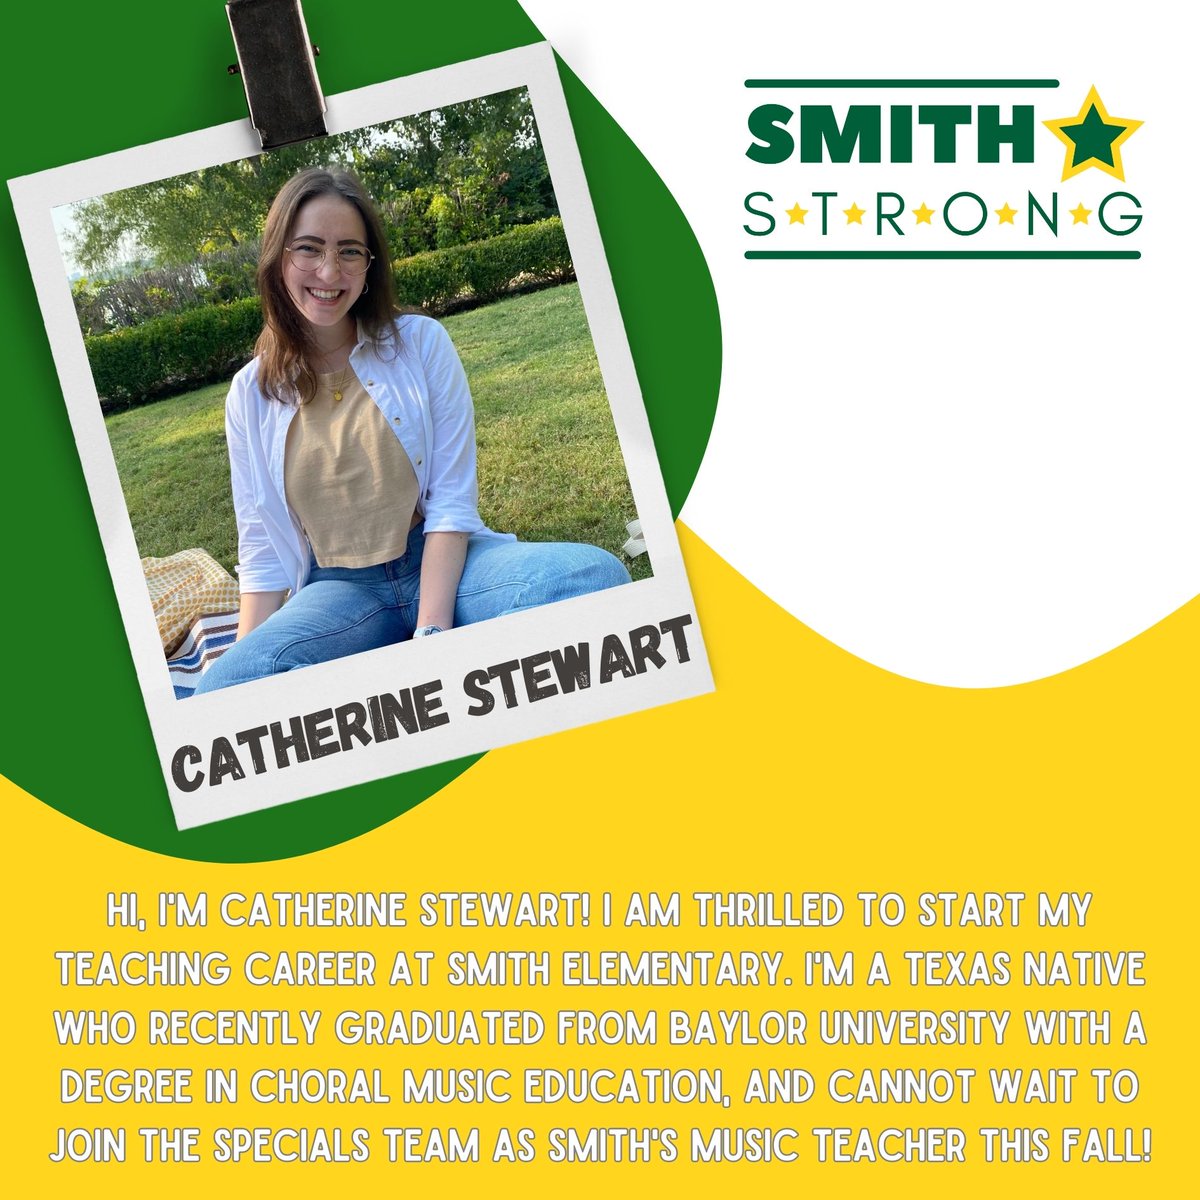 #SMITHSTRONG💪, help us welcome Catherine Stewart to Smith Elementary! She will be joining our Specials team and teaching music here at Smith Elementary!💪💚⭐️